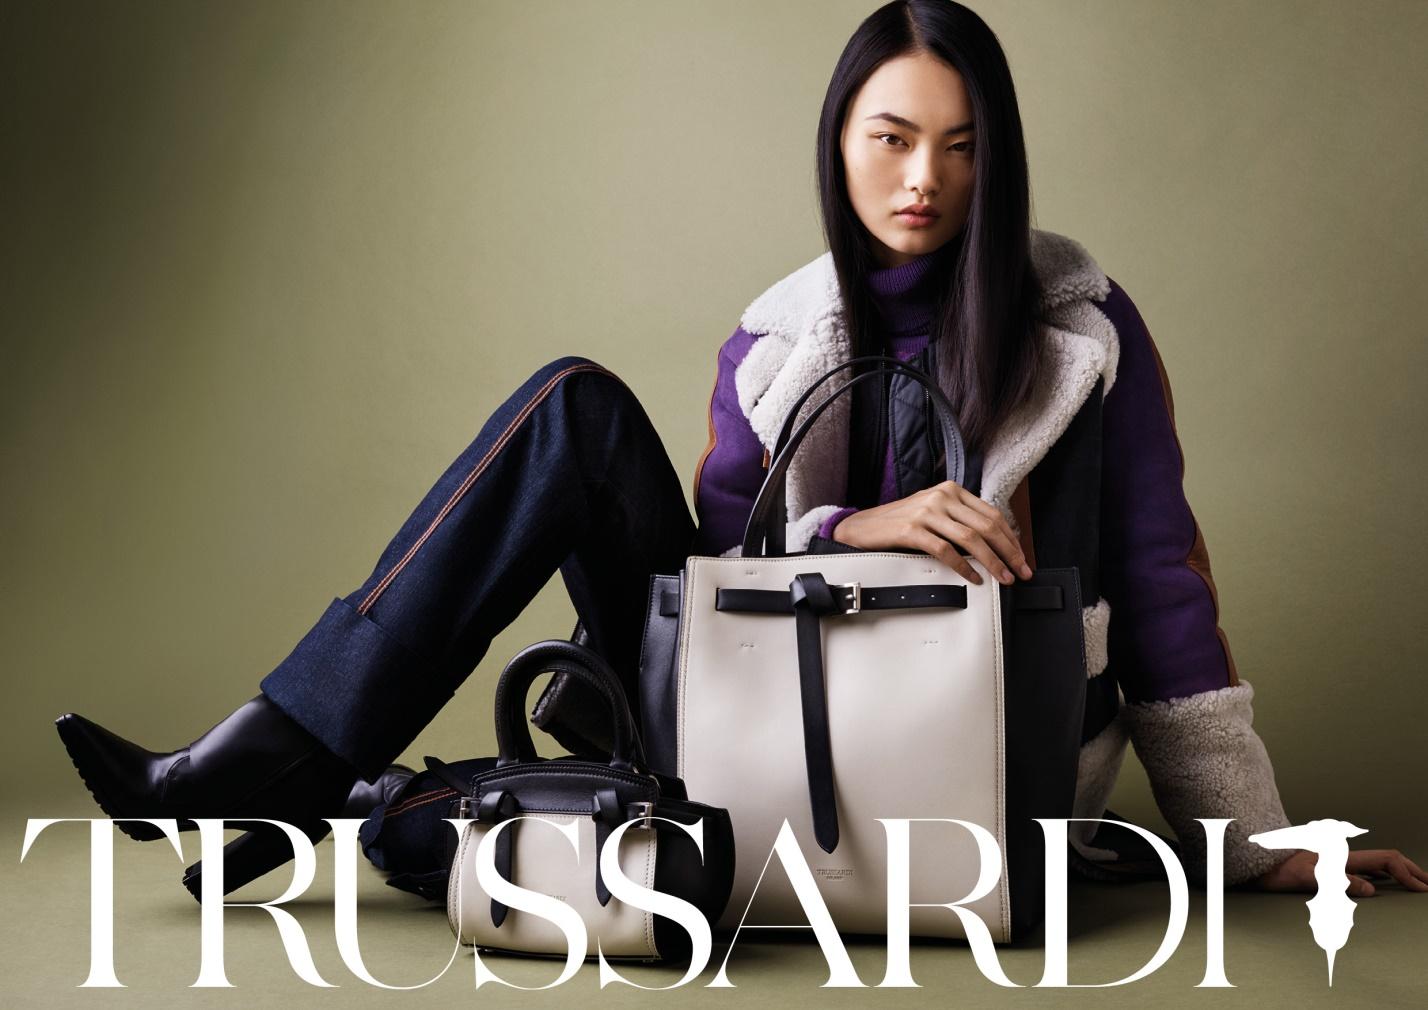 Quattro R acquired one of top famous fashion names  – Trussardi